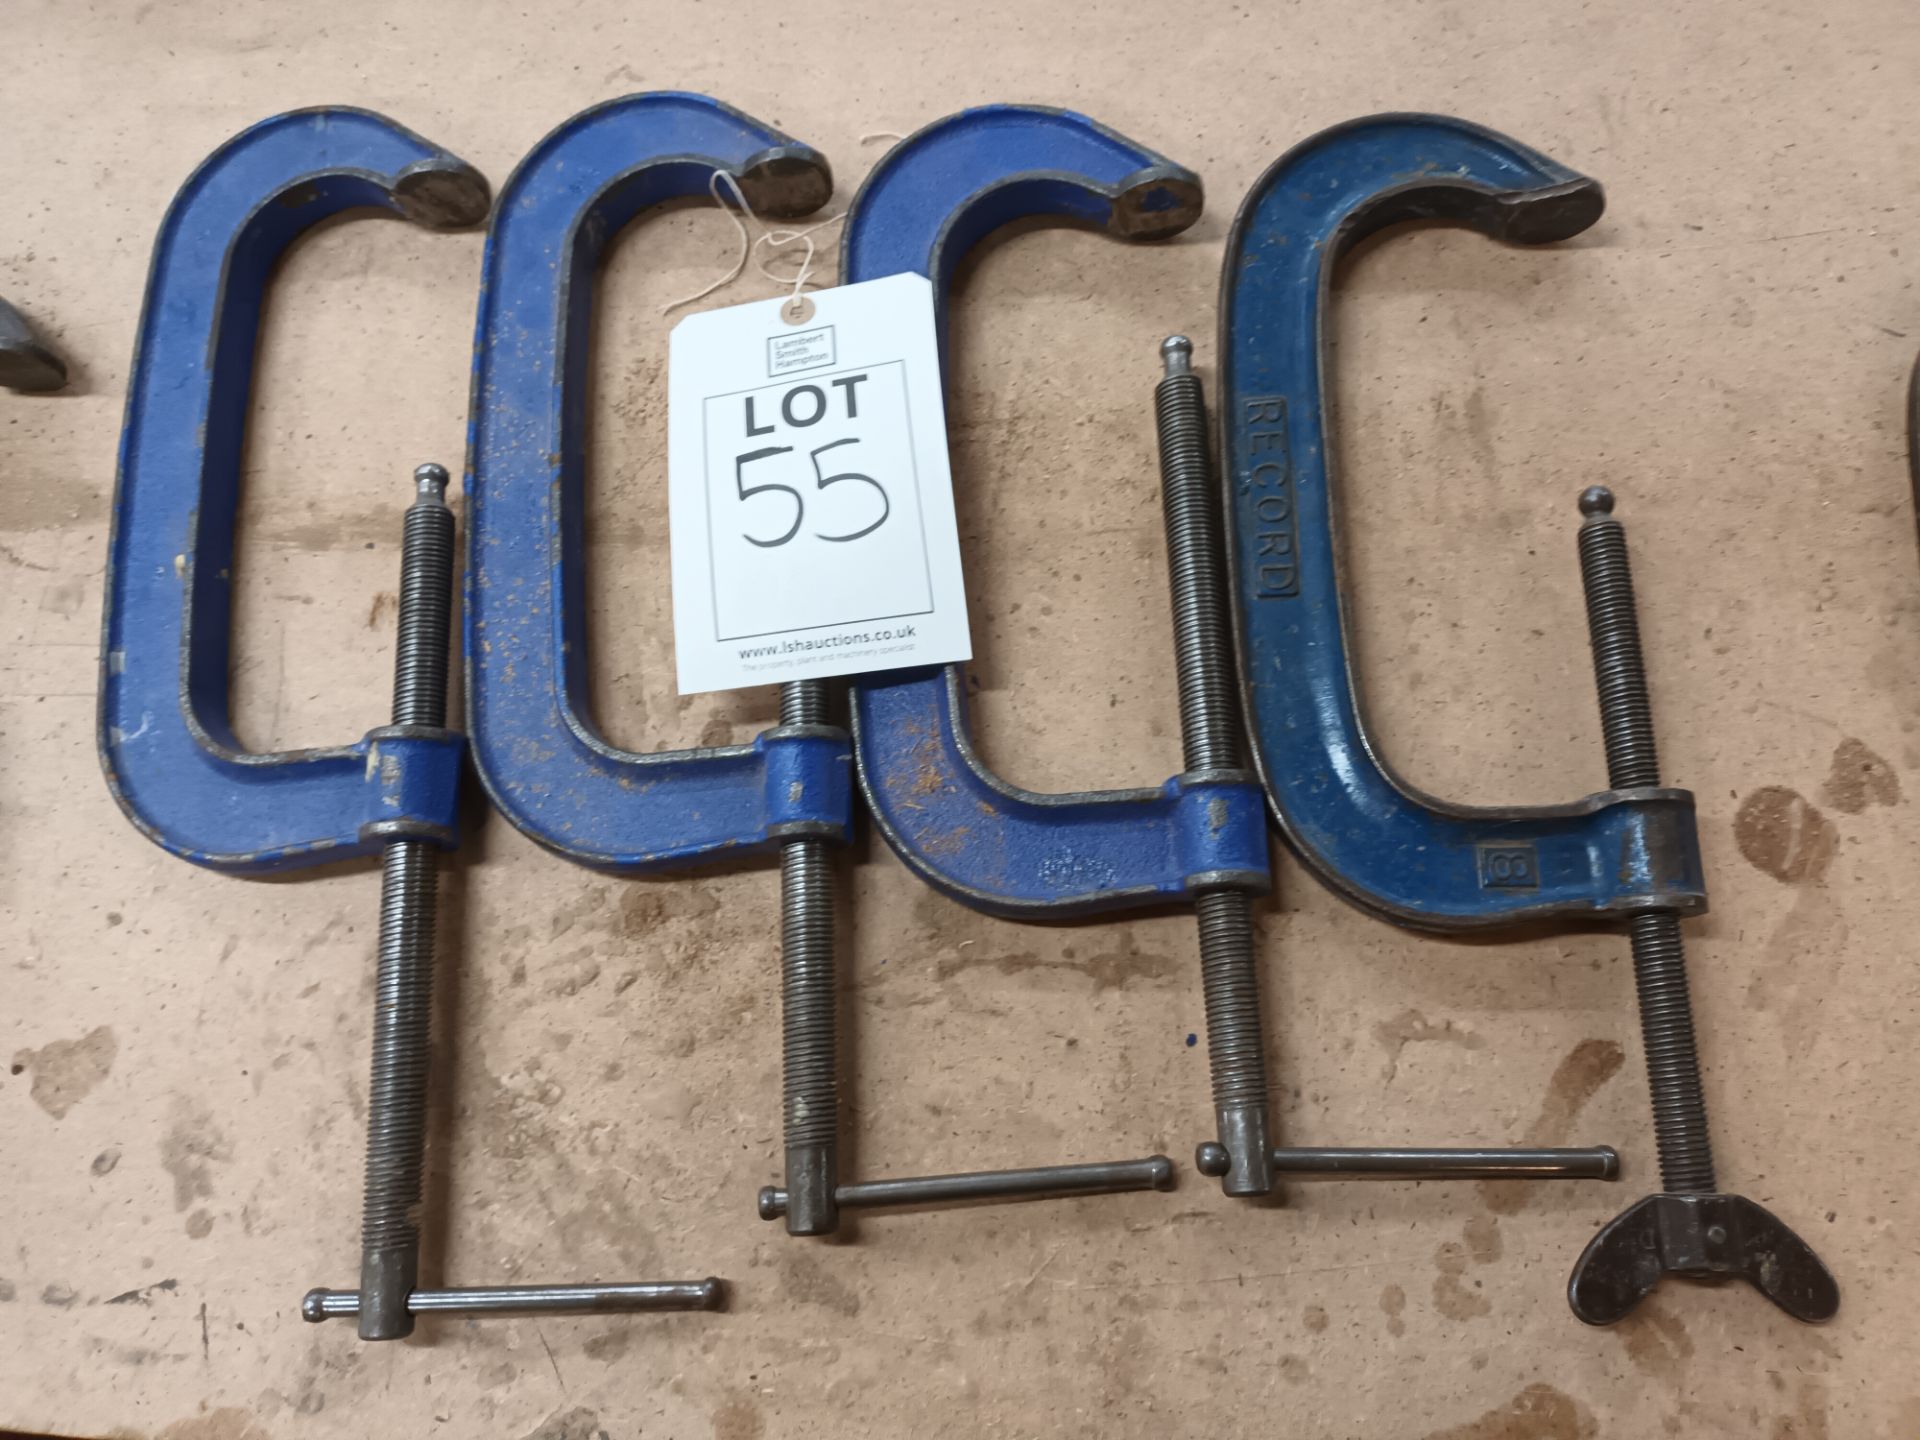 4 G-clamps